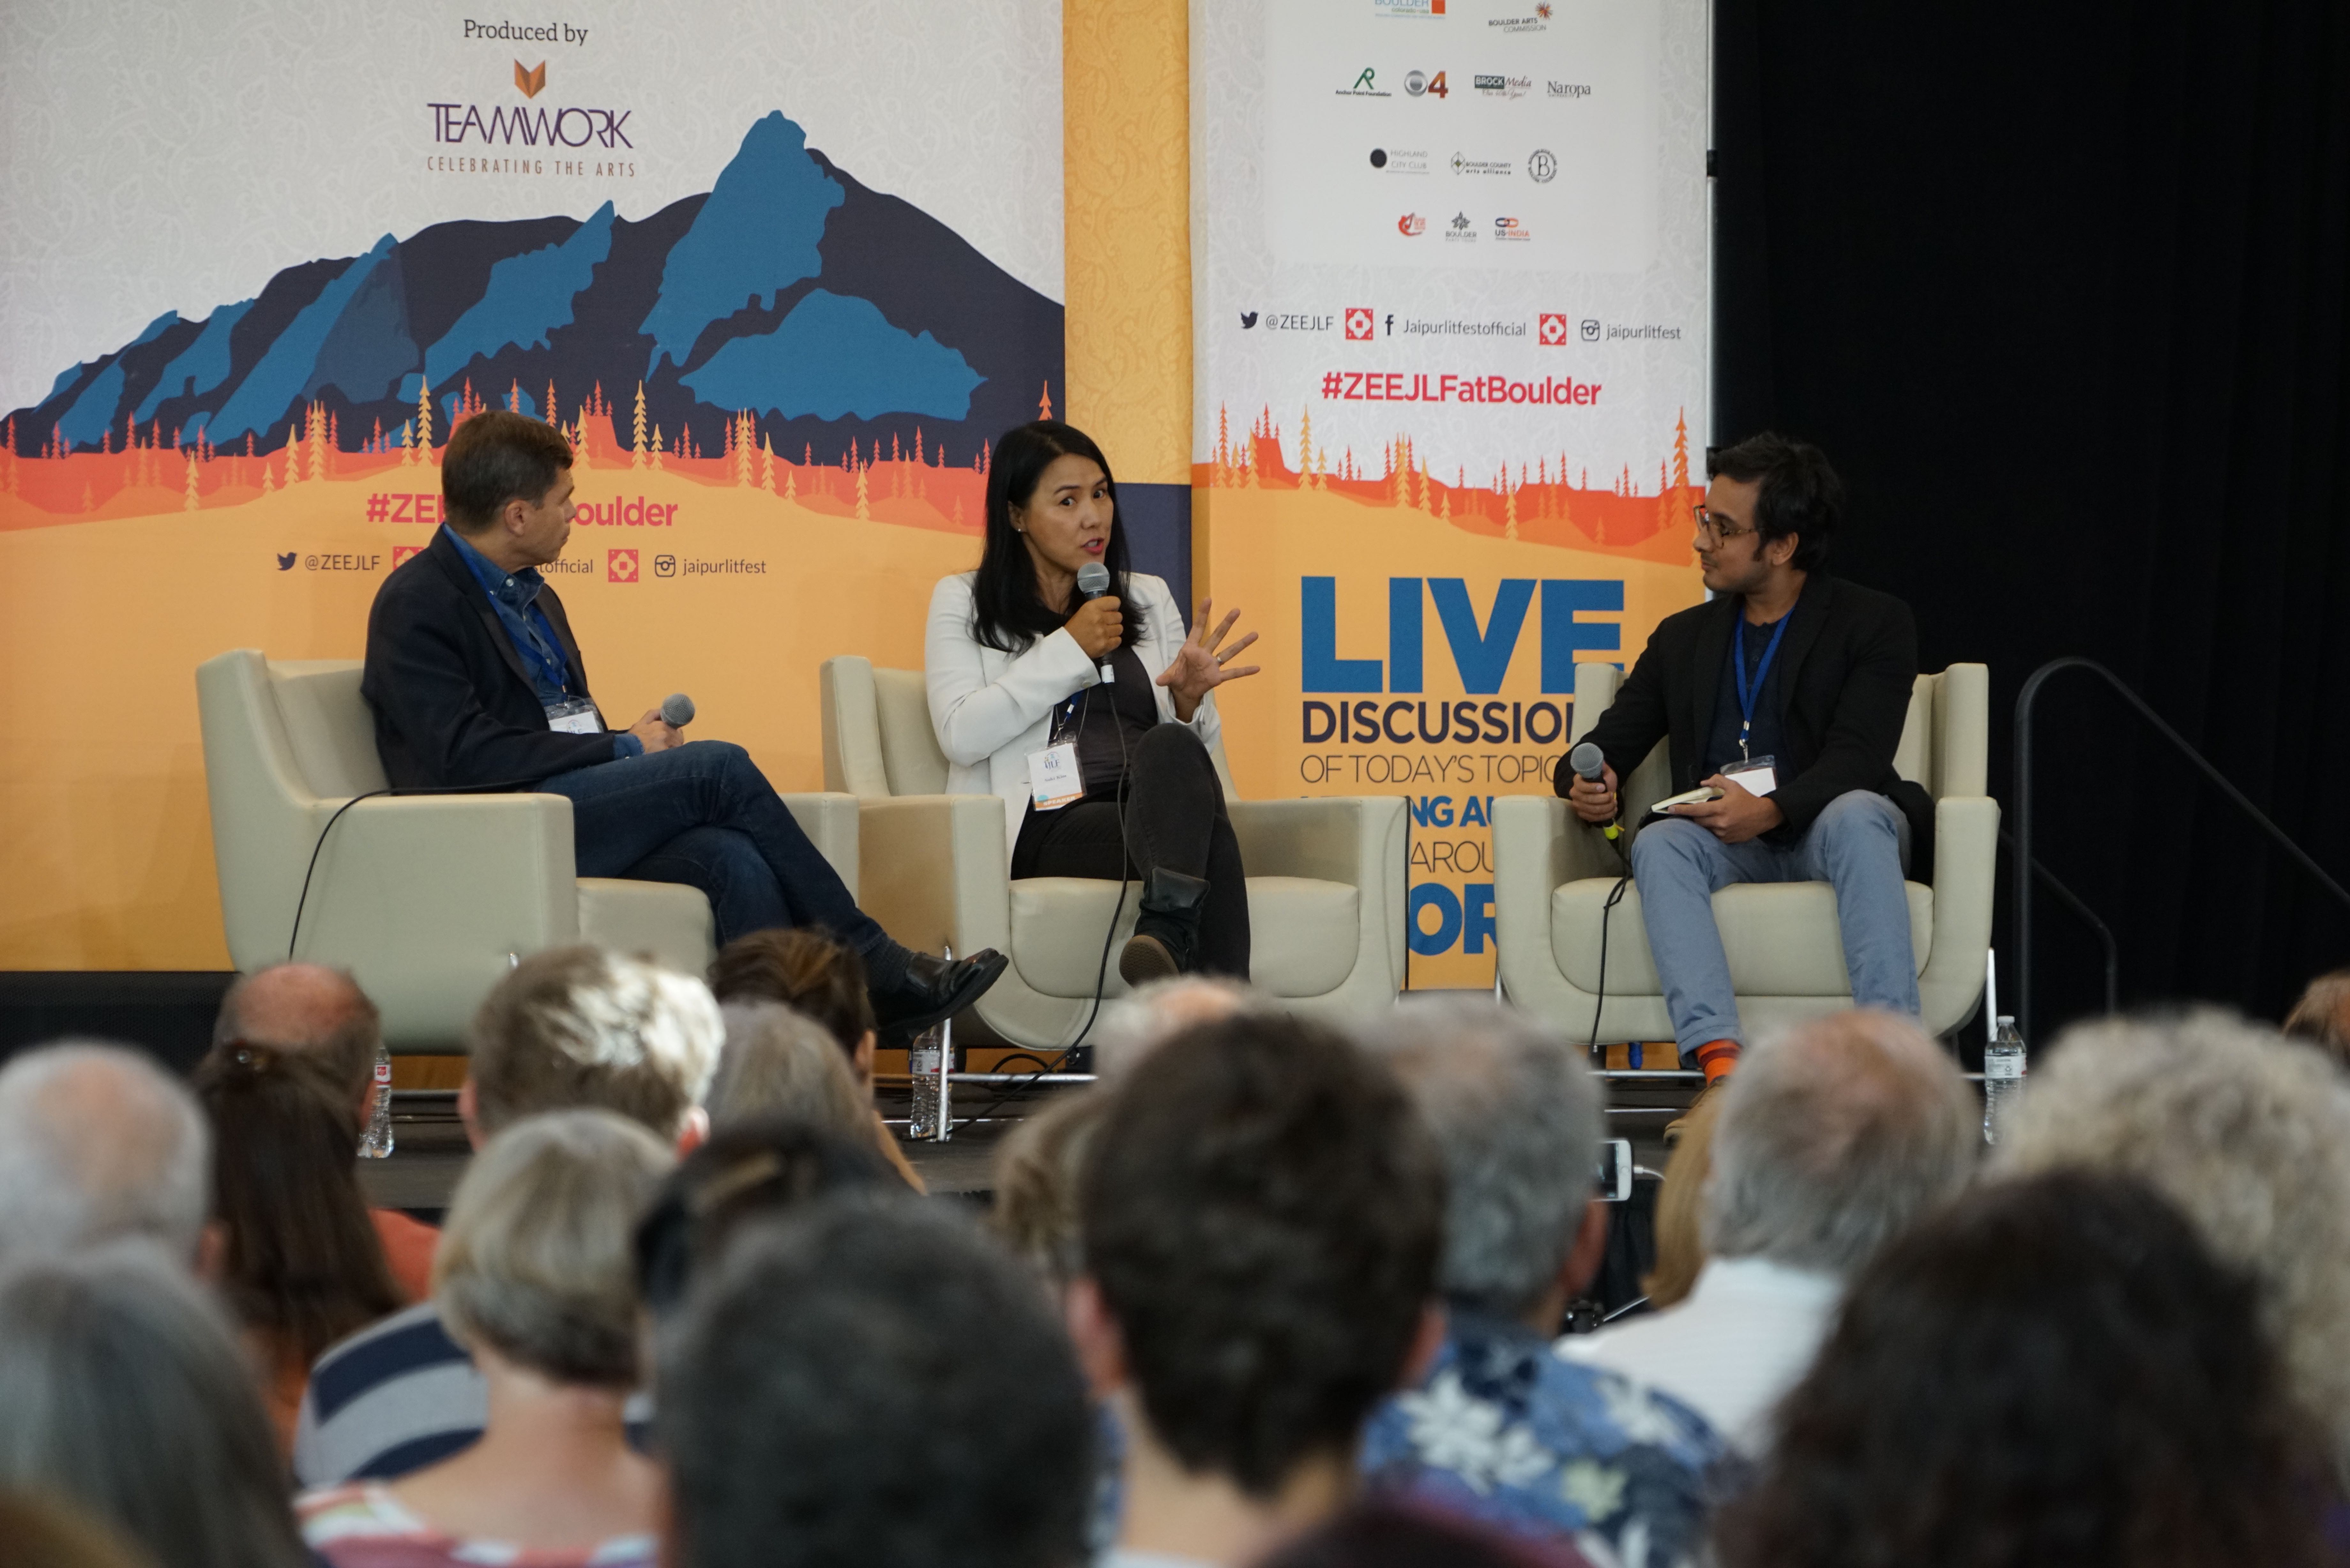 Michael Rezendes and Suki Kim in Conversation with Kanishk Tharoor-Photo by Will Hauge